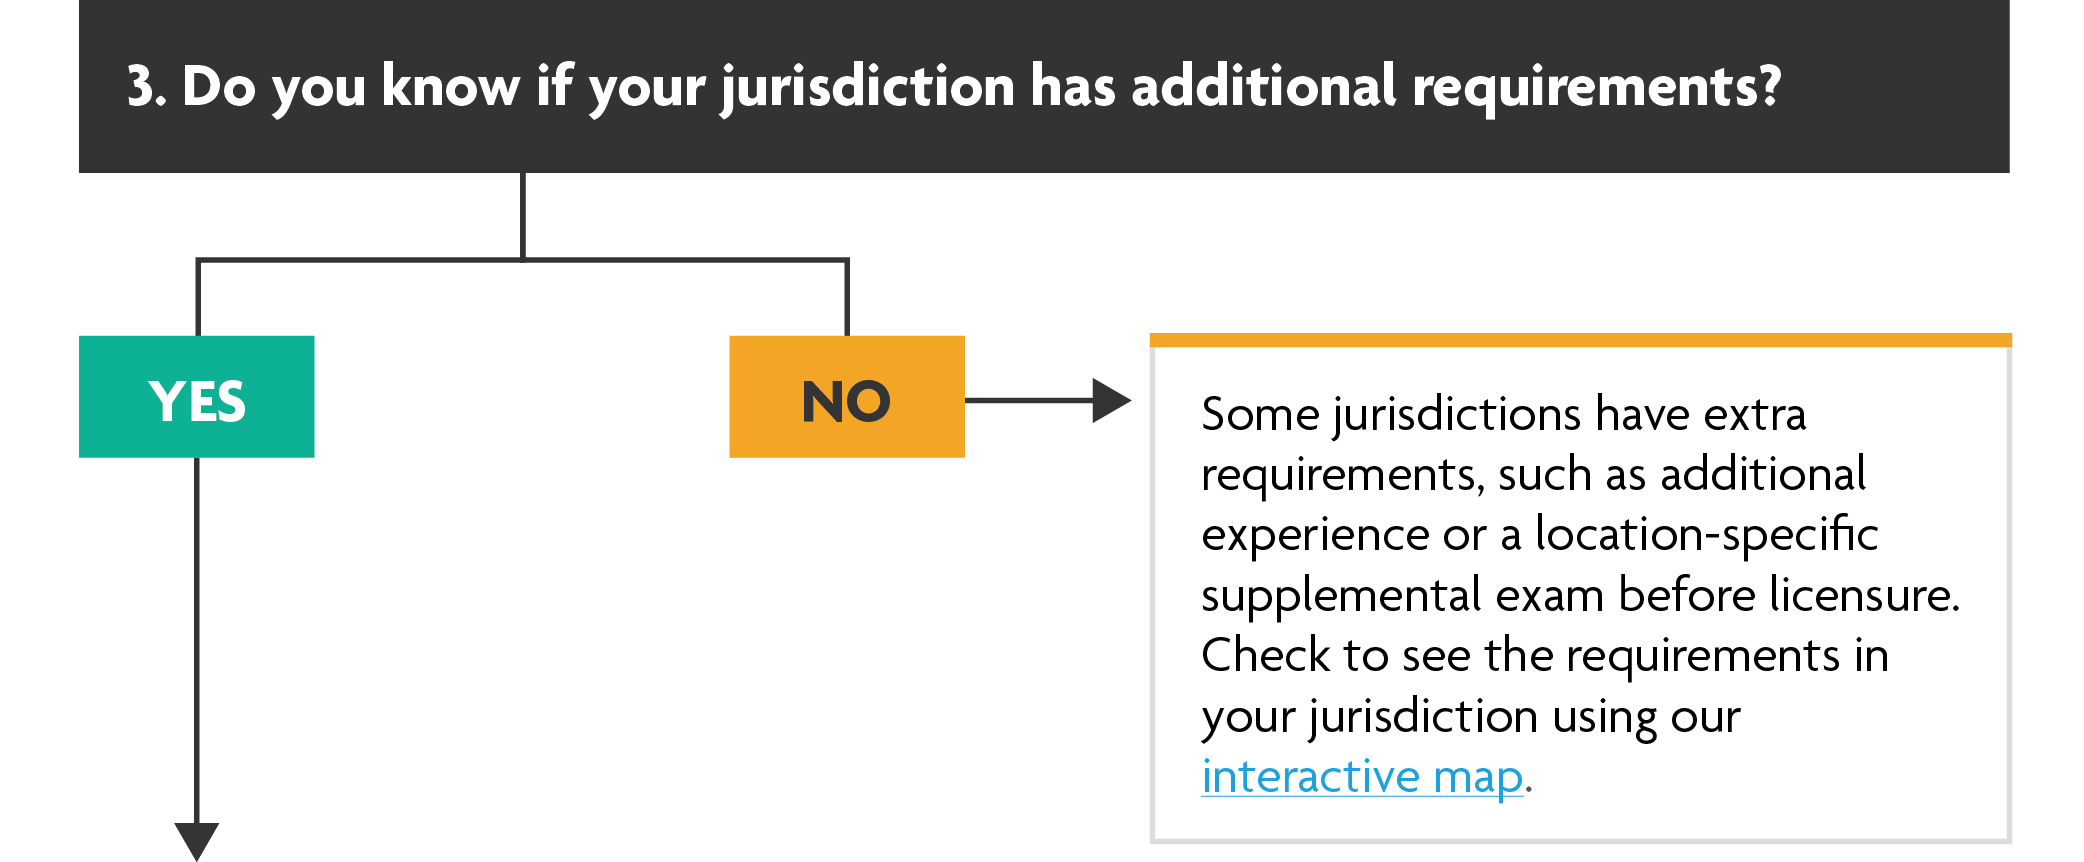 Question 3: Do you know if your jurisdiction has additional requirements? If yes: move to the next step. If no: Some jurisdictions have extra requirements, such as additional experience or a location-specific supplemental exam before licensure. Check to see the requirements in your jurisdiction using our interactive map.